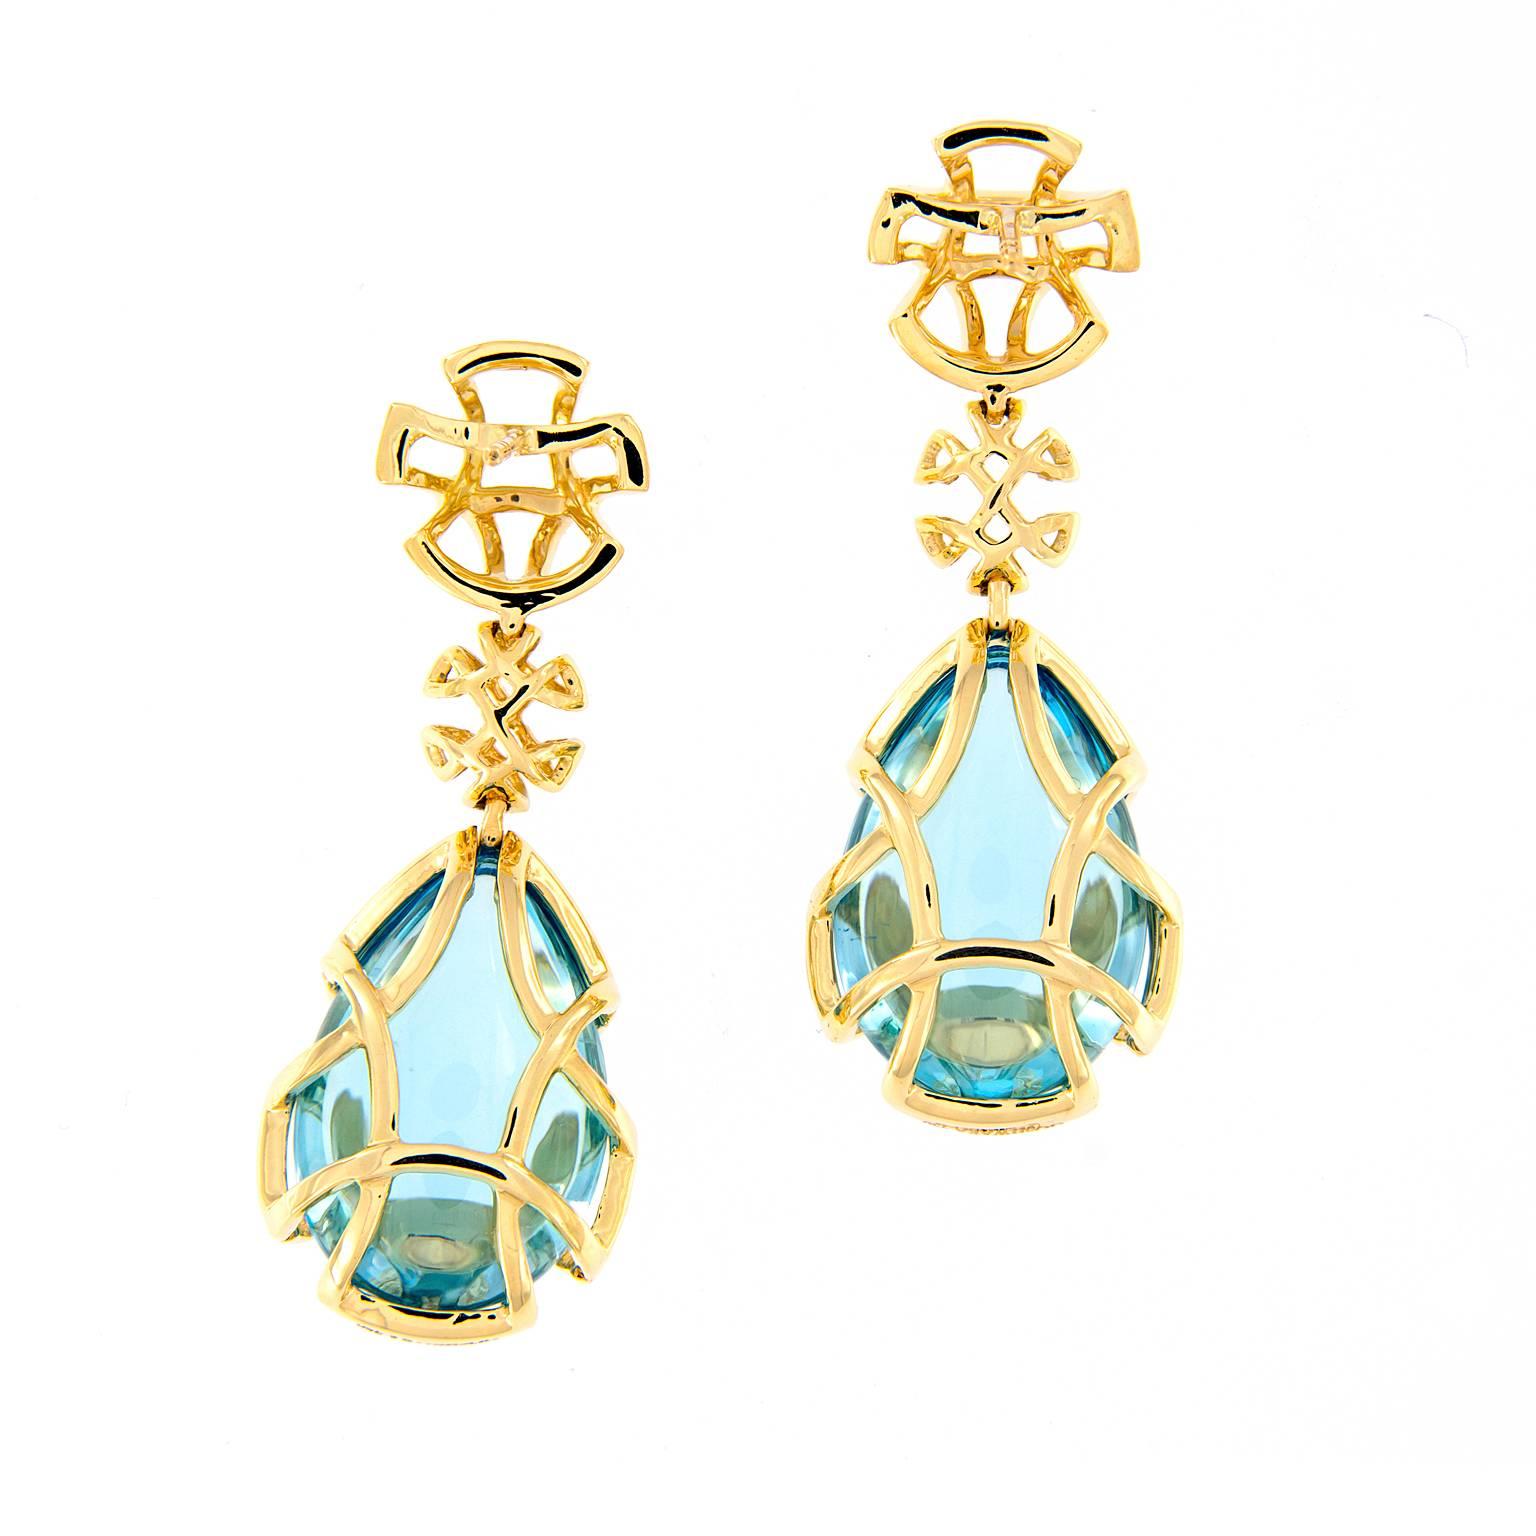 These blue topaz teardrops drop from double 18k yellow gold discs and are covered in a gold cage design. From the Freedom Collection designed by Goshwara. Weighs 20.8 grams. Marked Goshwara.

Blue Topaz 18.08 cttw